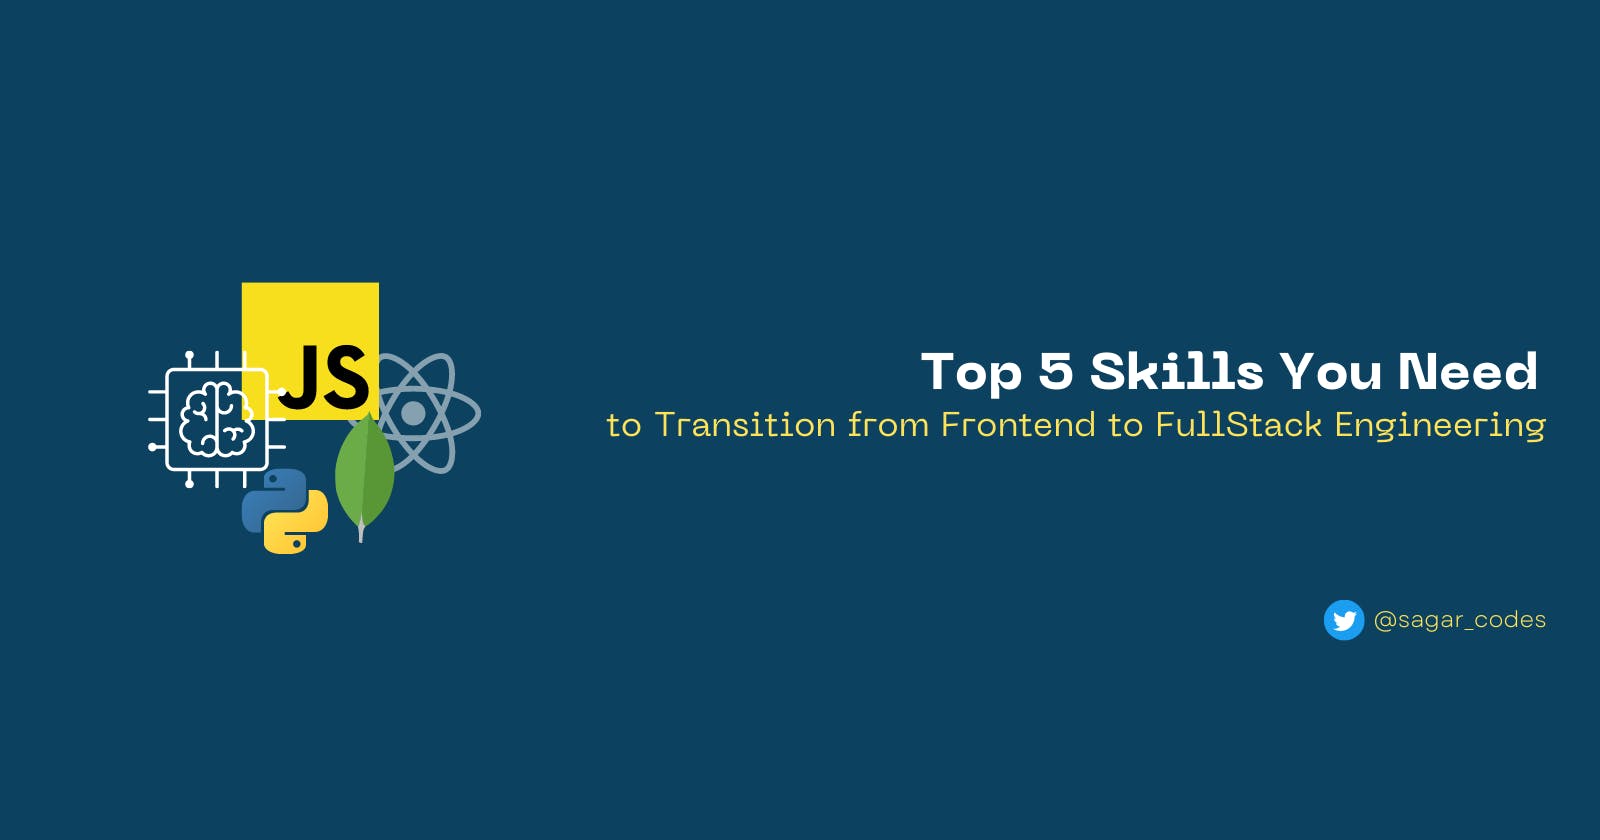 Top 5 Skills You Need to Transition from Frontend to FullStack Engineering